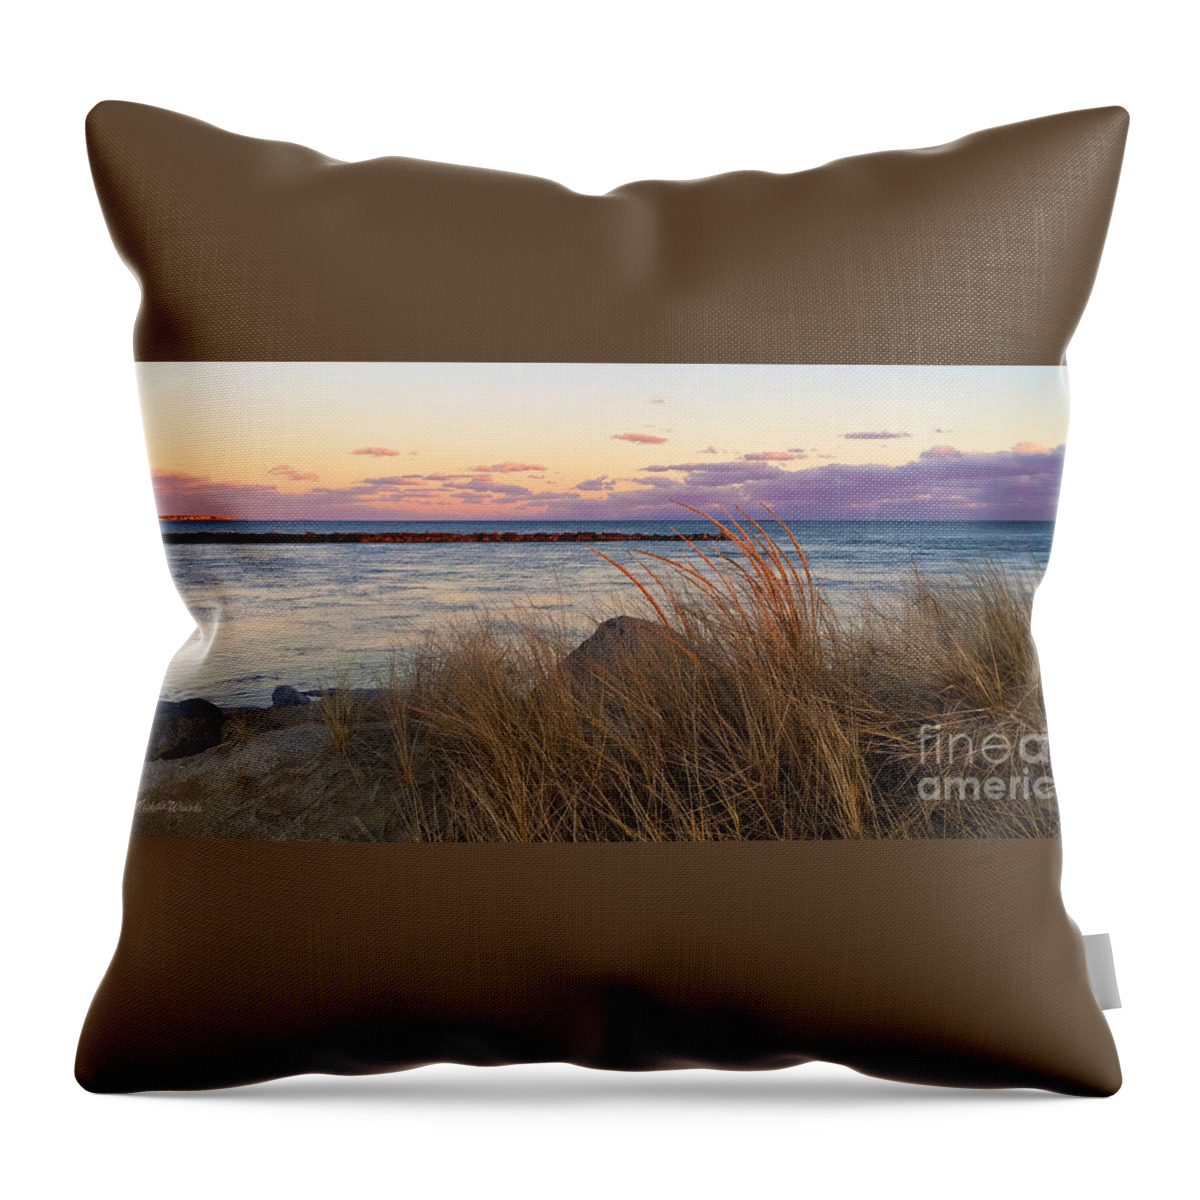 Smugglers Beach Sunset Throw Pillow featuring the photograph Smugglers Beach Sunset by Michelle Constantine